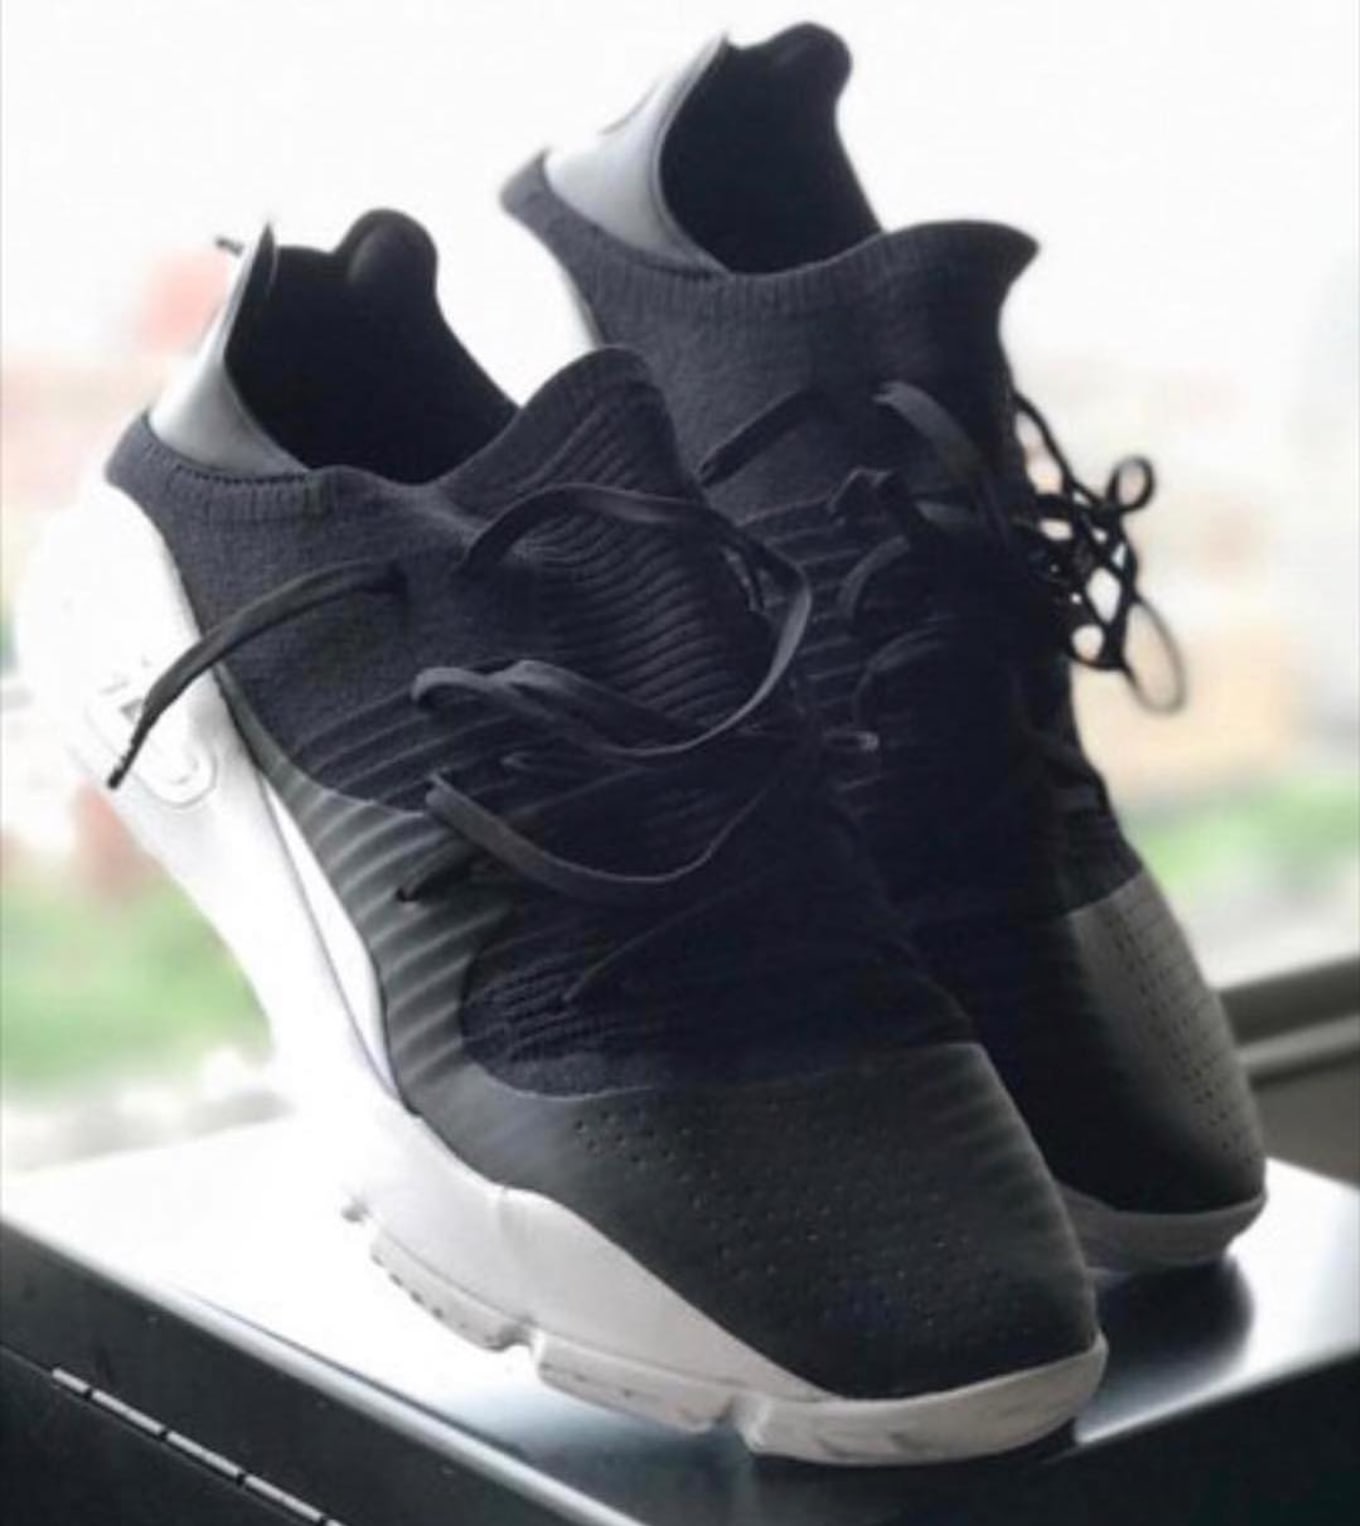 curry 4 low black